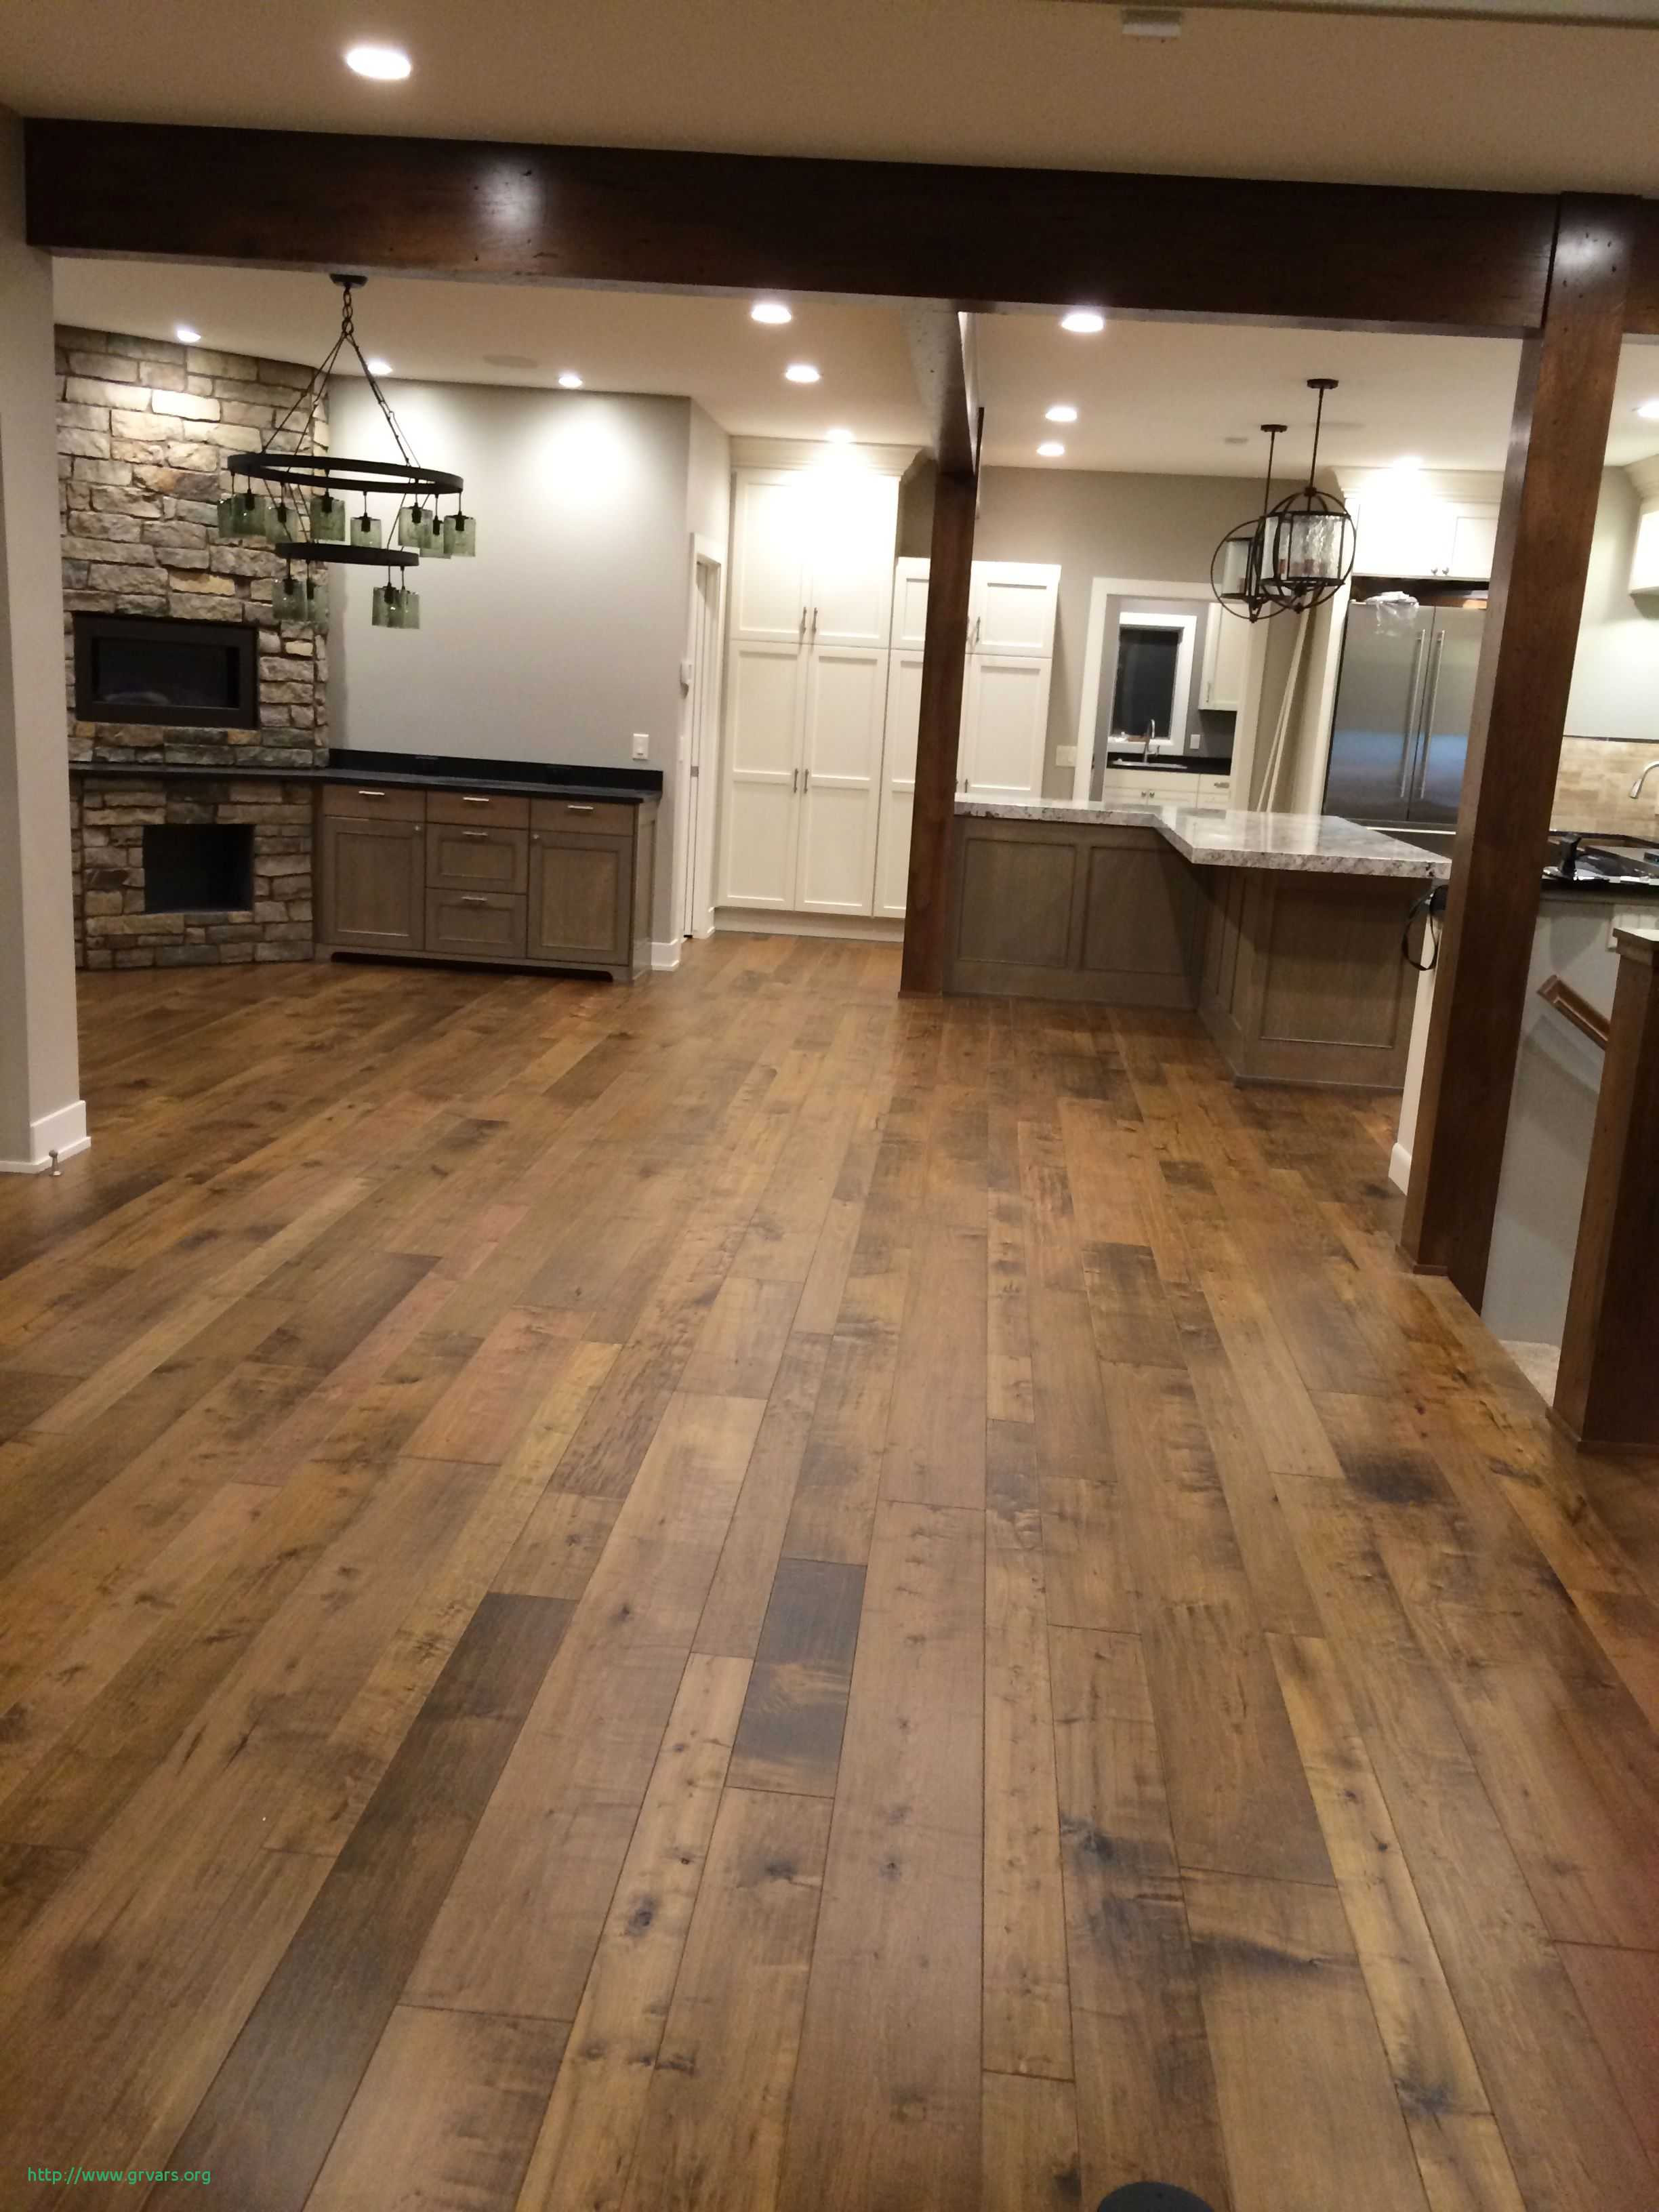 14 Stylish Denver Hardwood Floor Refinishing Cost 2023 free download denver hardwood floor refinishing cost of 16 luxe how to remove carpet adhesive from hardwood floors ideas blog throughout how to remove carpet adhesive from hardwood floors beau monterey ha